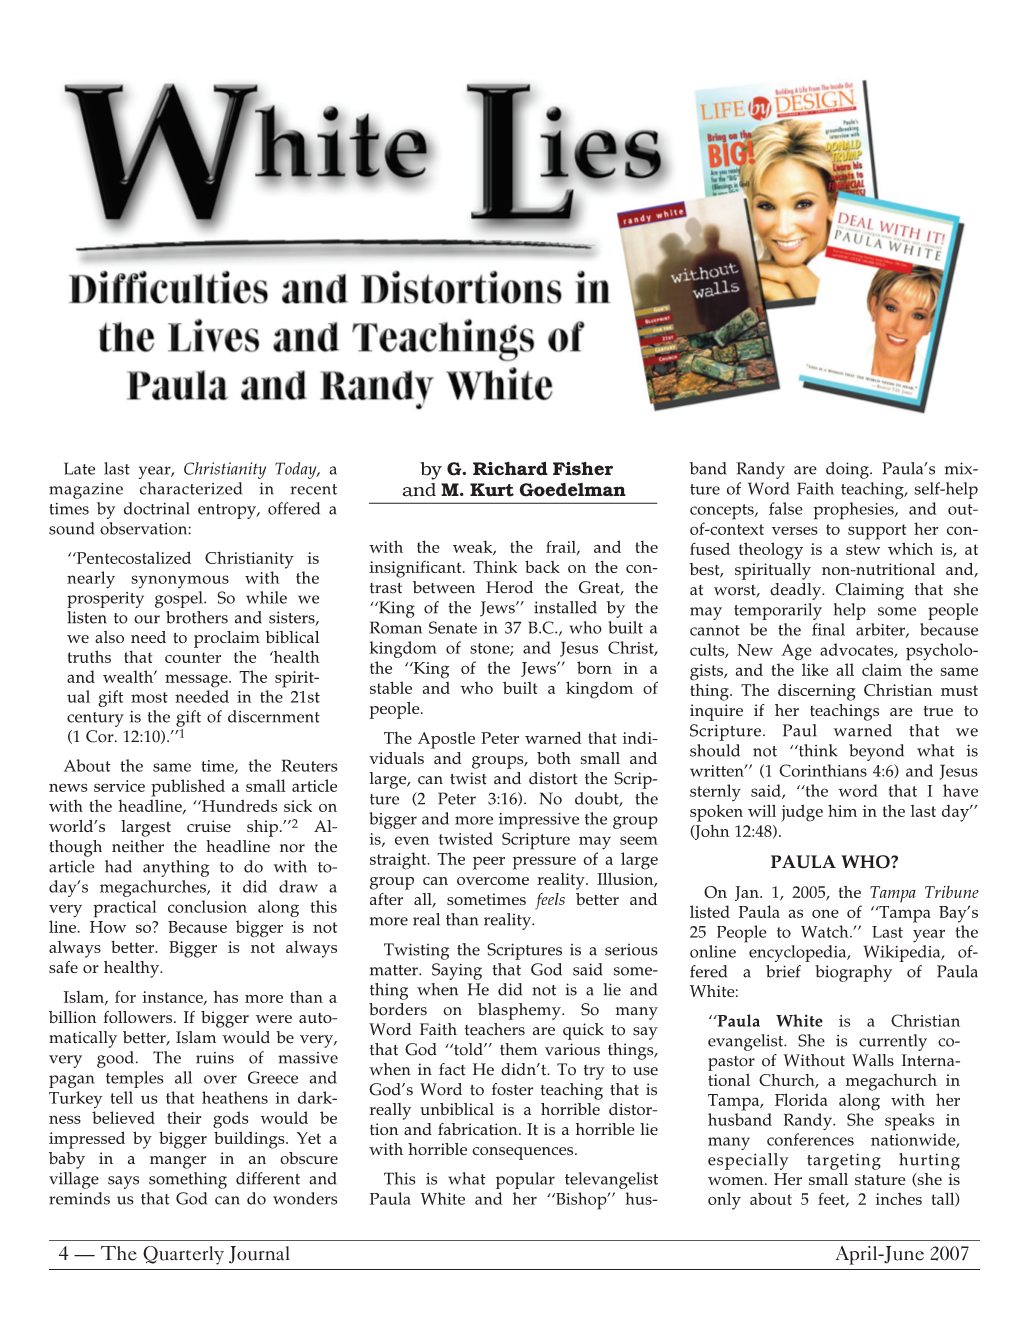 White Lies – Difficulties & Distortions of Paula & Randy White